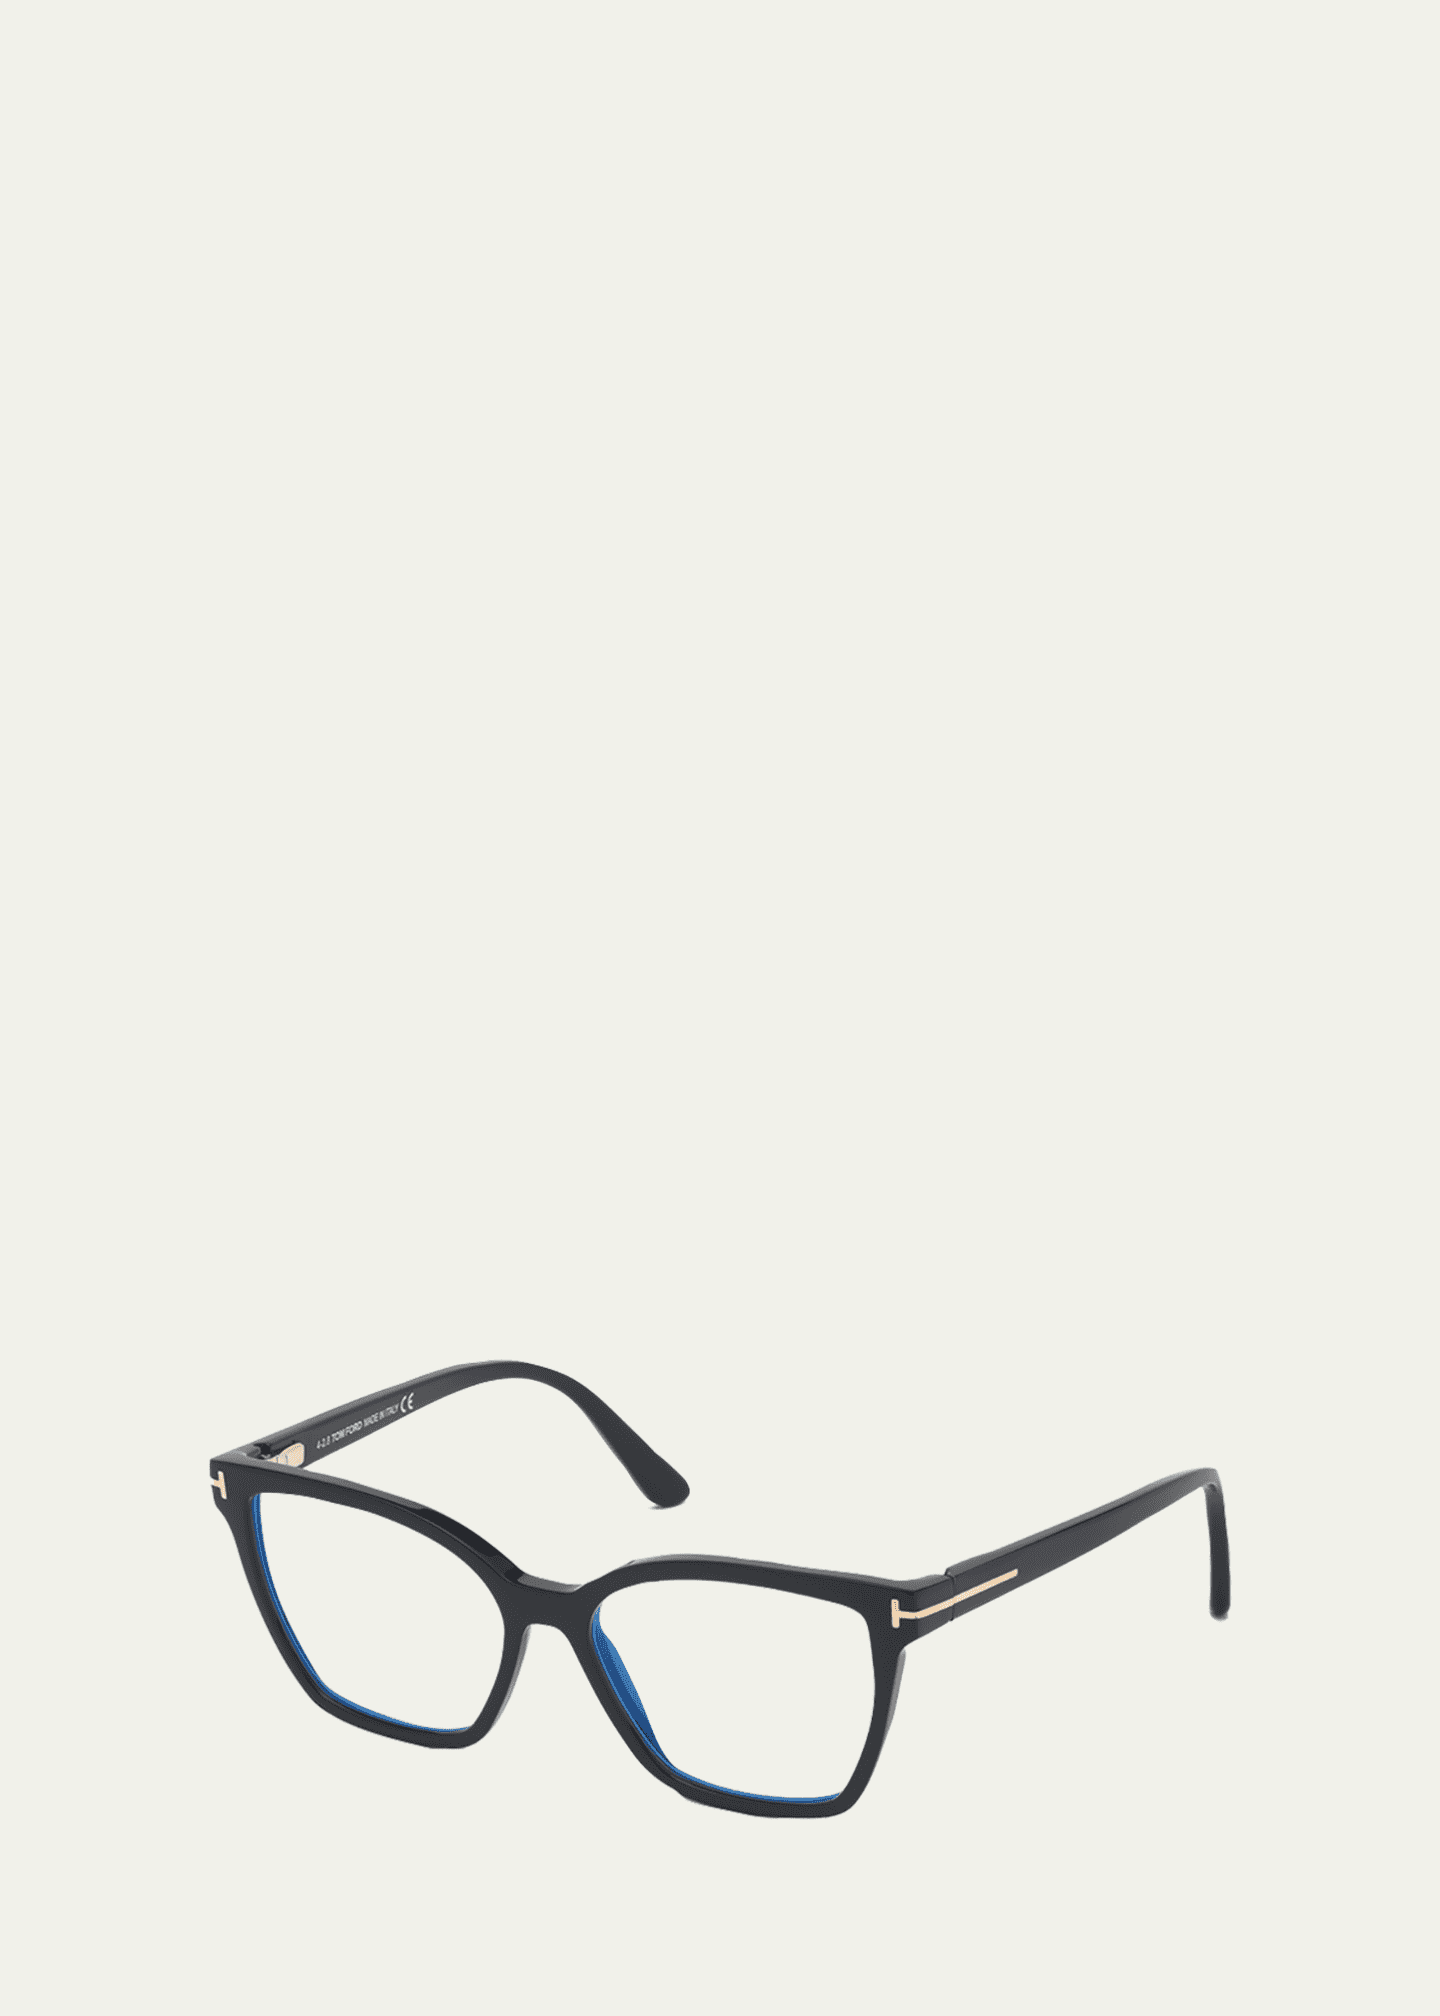 TOM FORD Square Blue-Block Optical Frames w/ Two Magnetic Sunglasses Clips  - Bergdorf Goodman